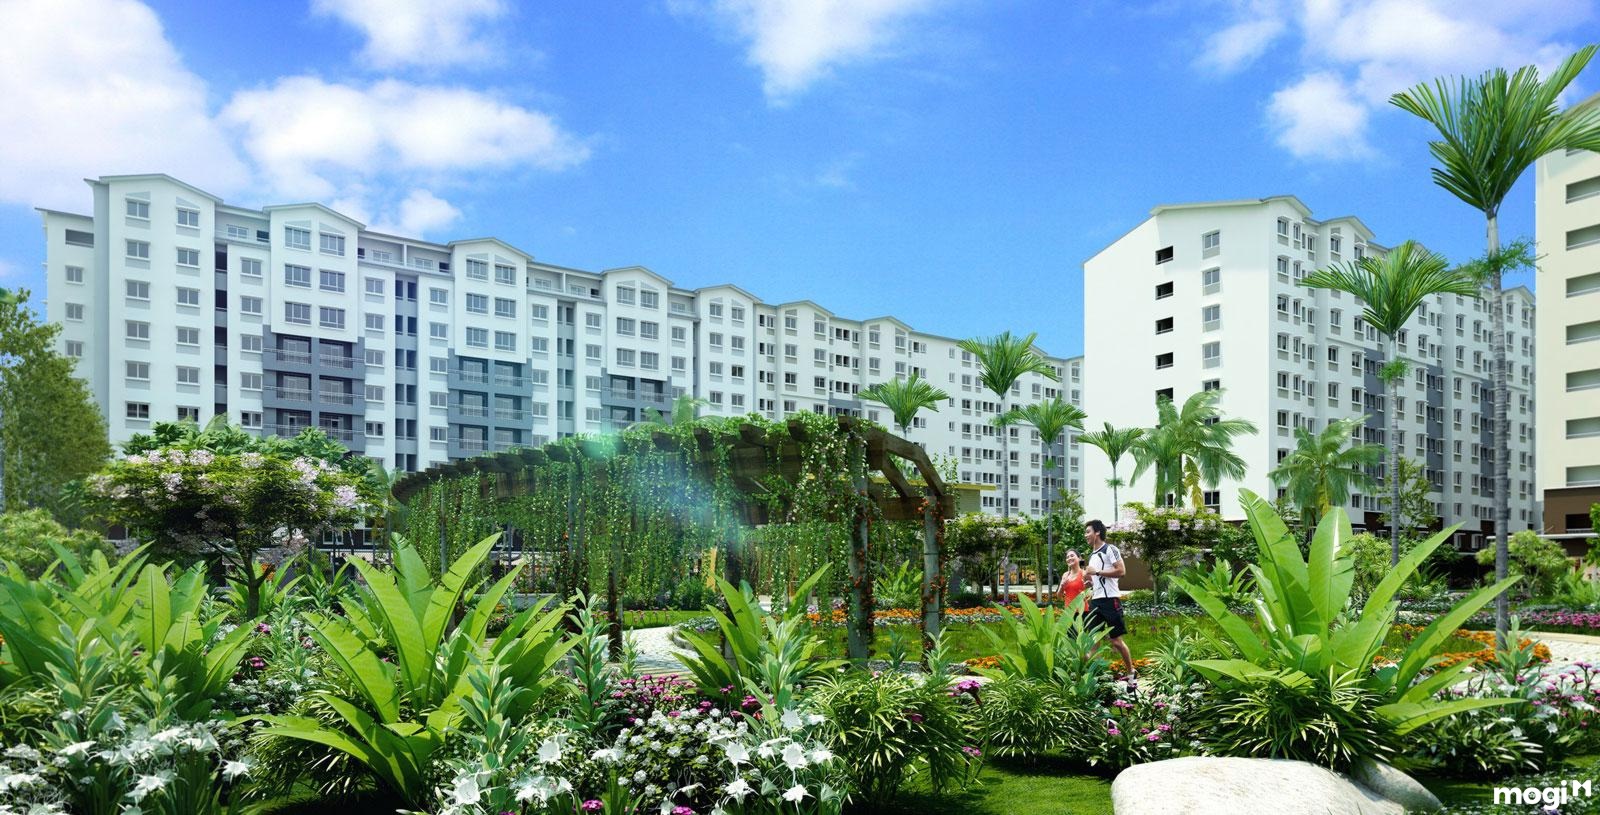 The real estate market in Da Nang promises a vibrant year ahead